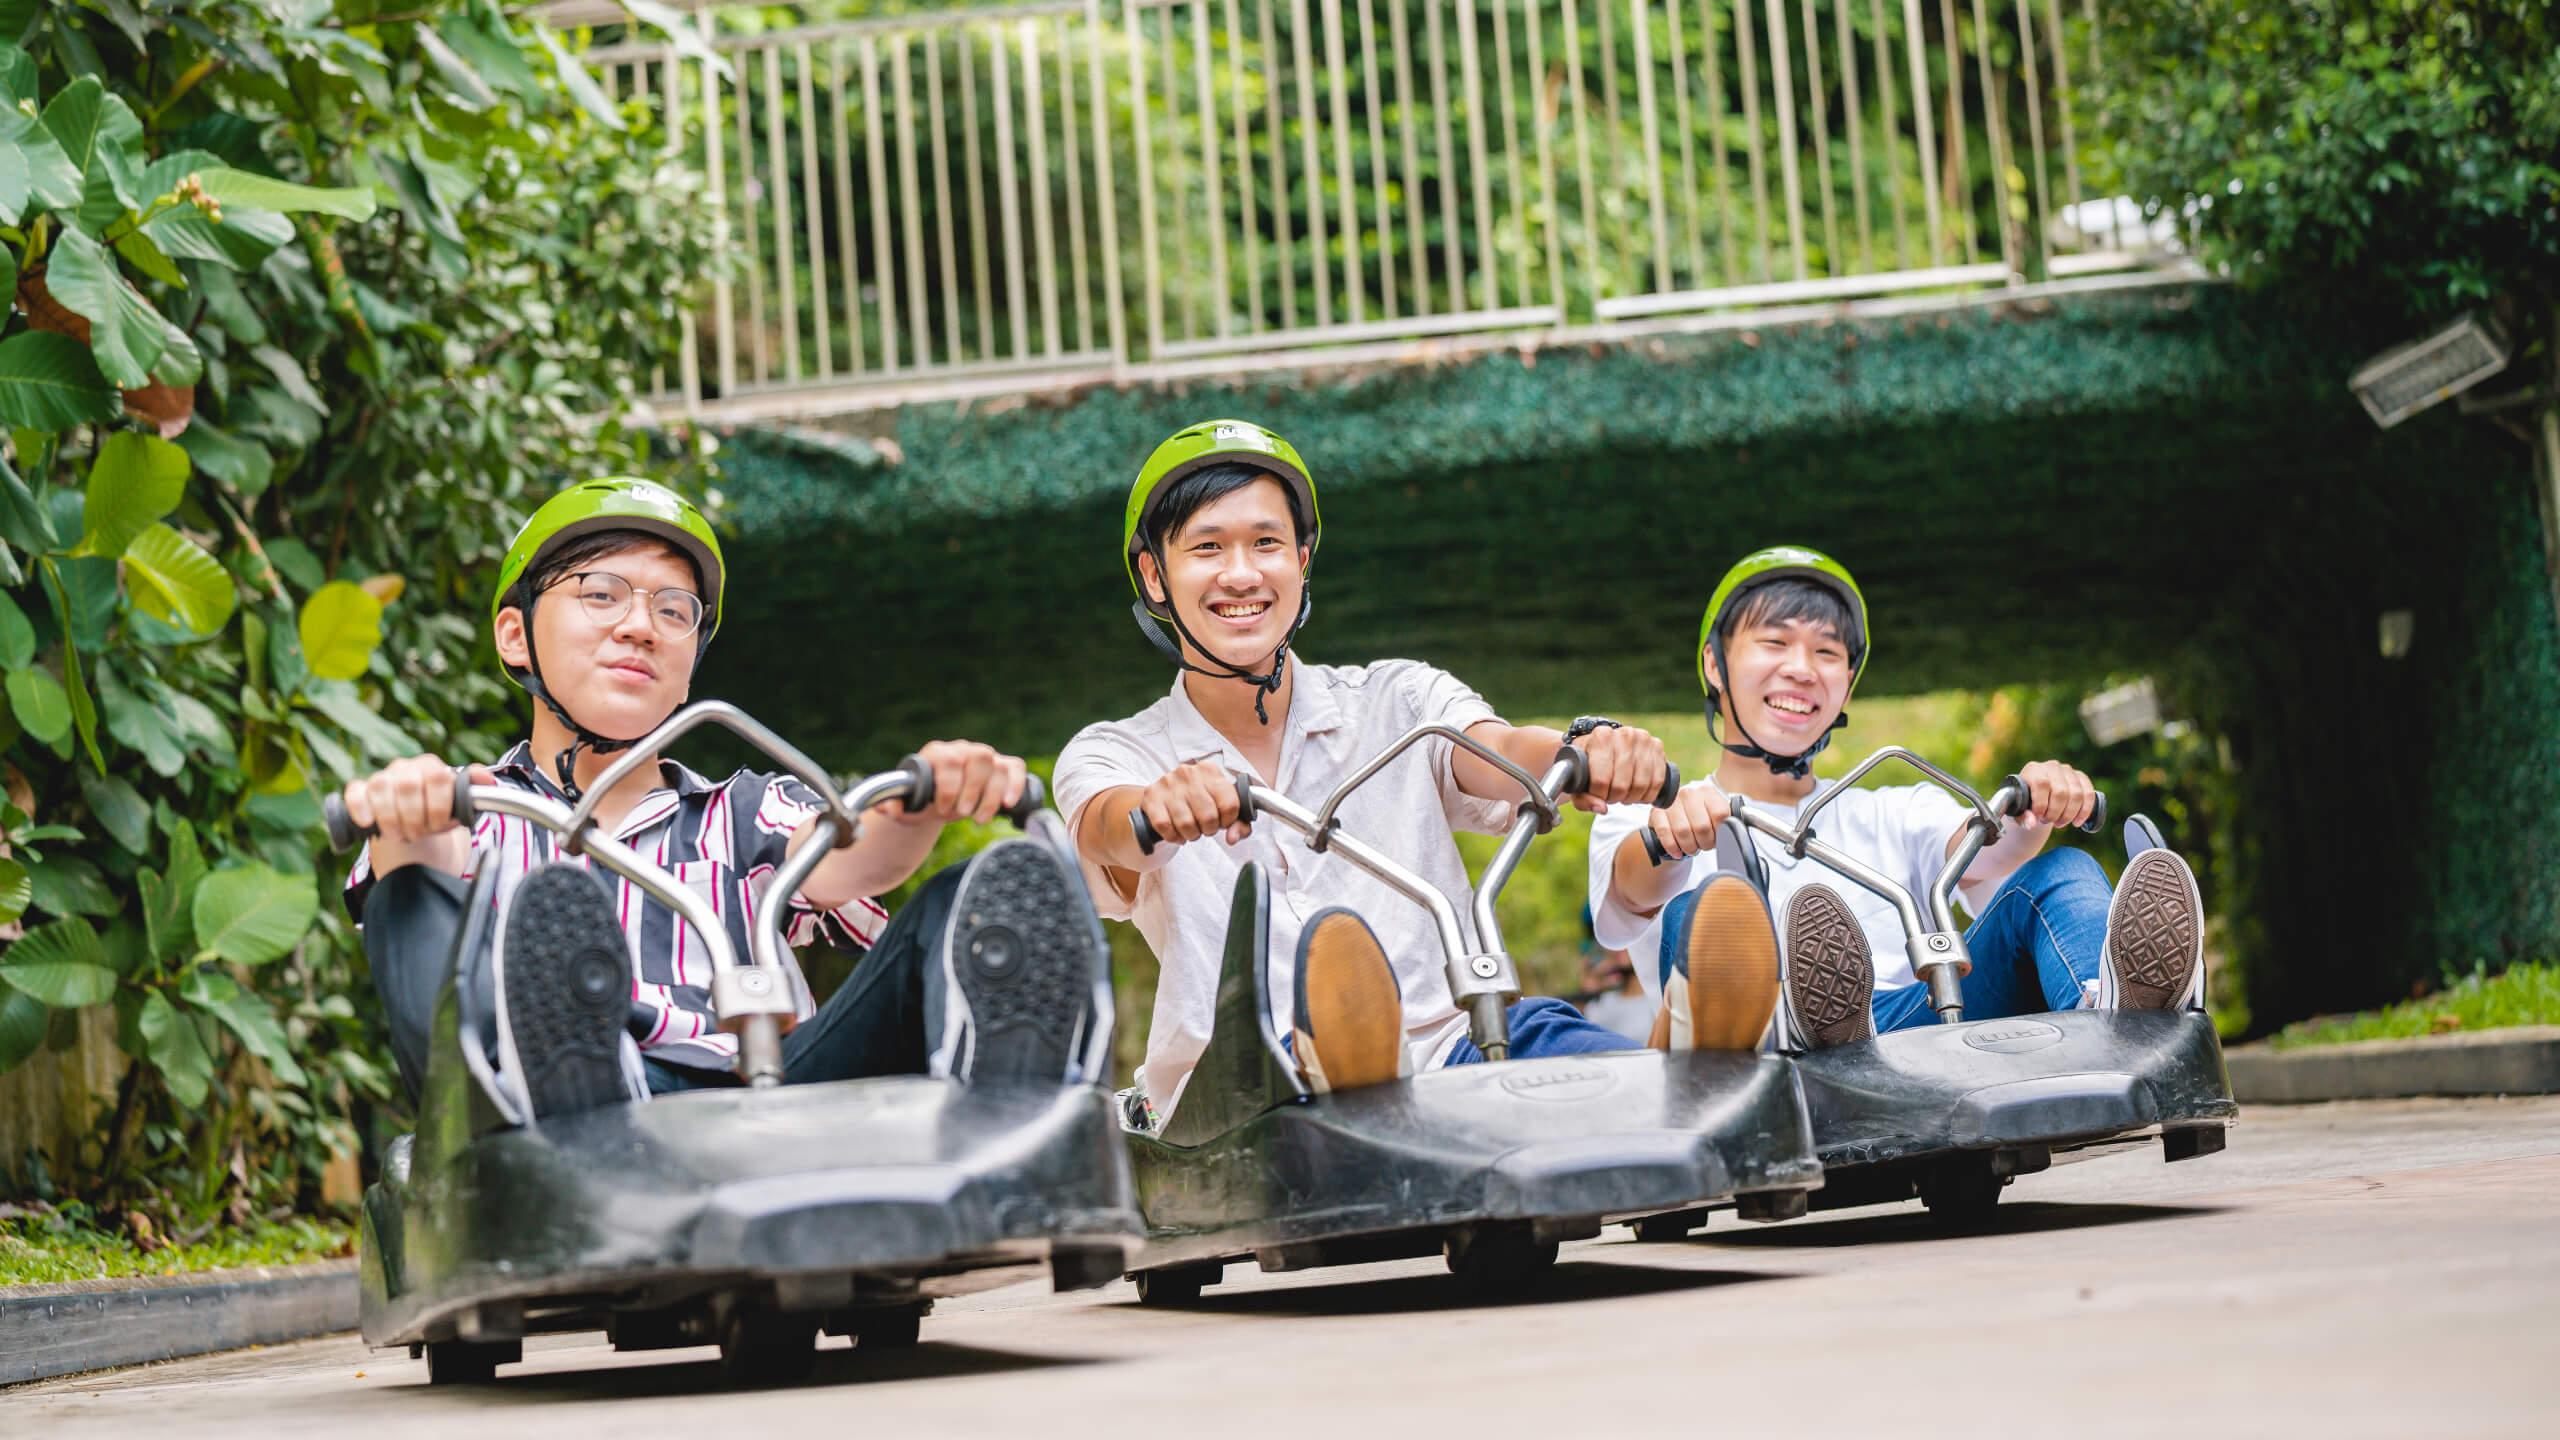 Three friends ride down the Luge tracks next to each other.